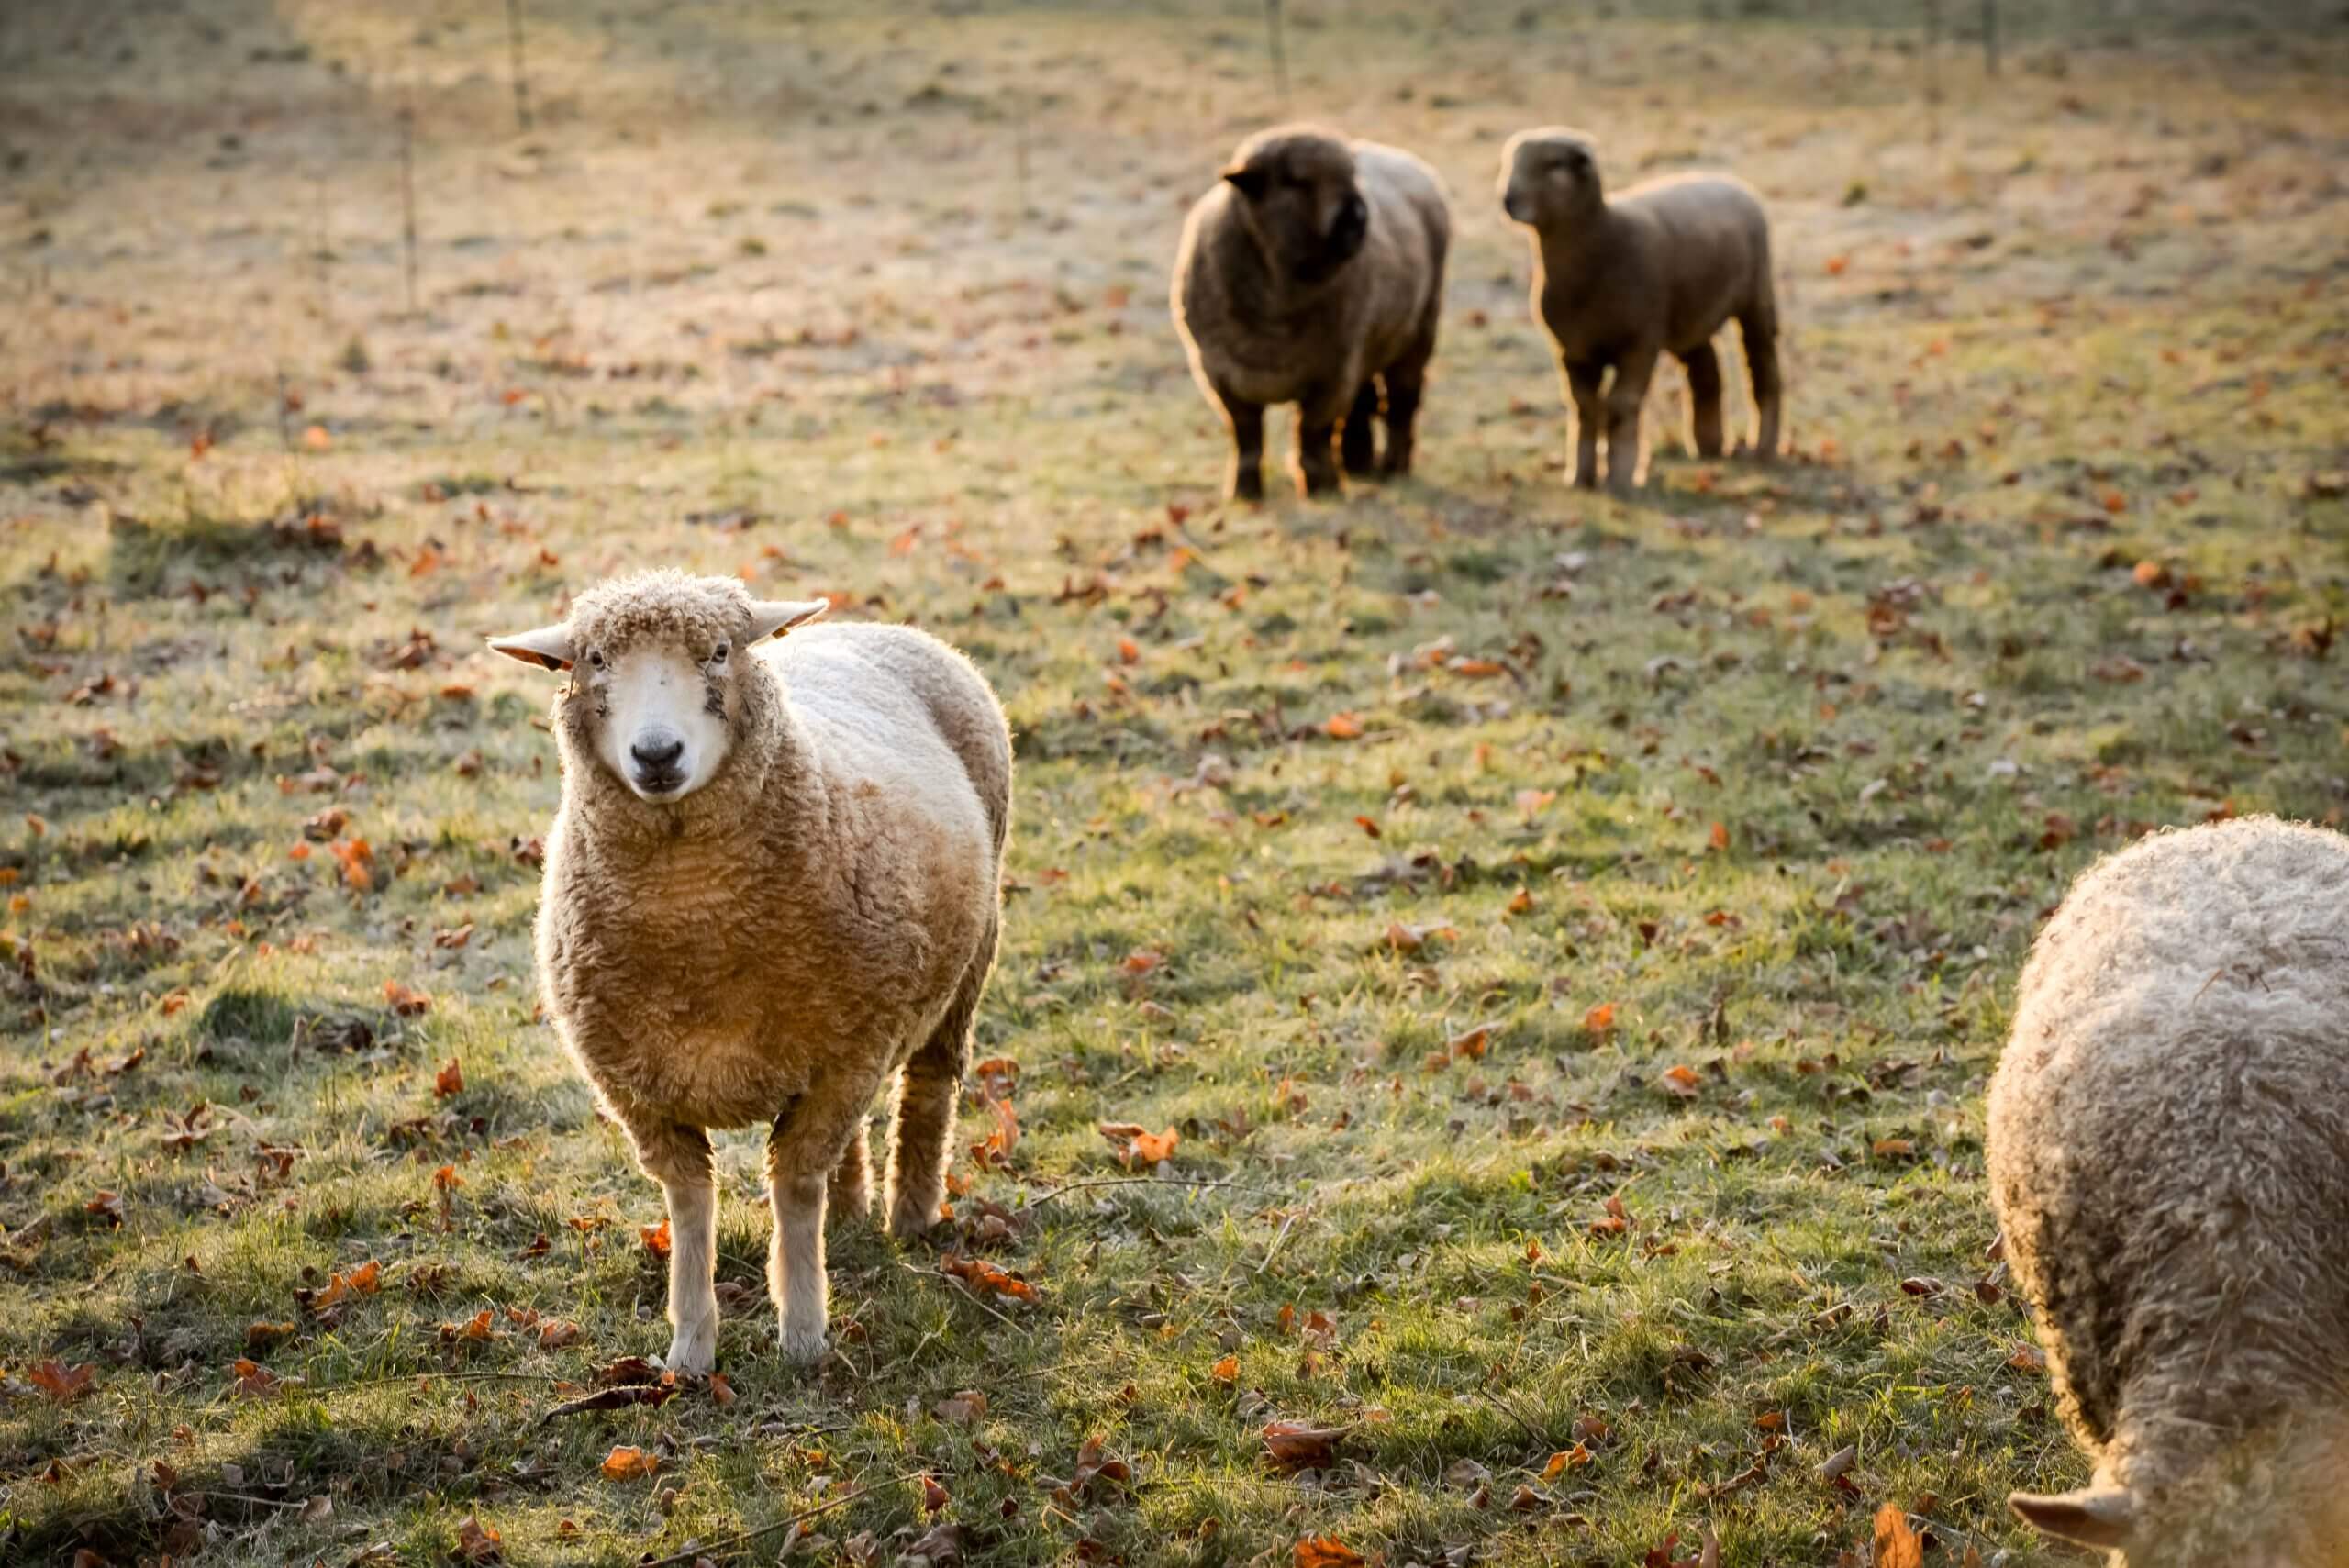 Four sheep in an icy field. Two sheep are in the background and two in the foreground. One sheep looks directly at the camera while one grazes nearby.